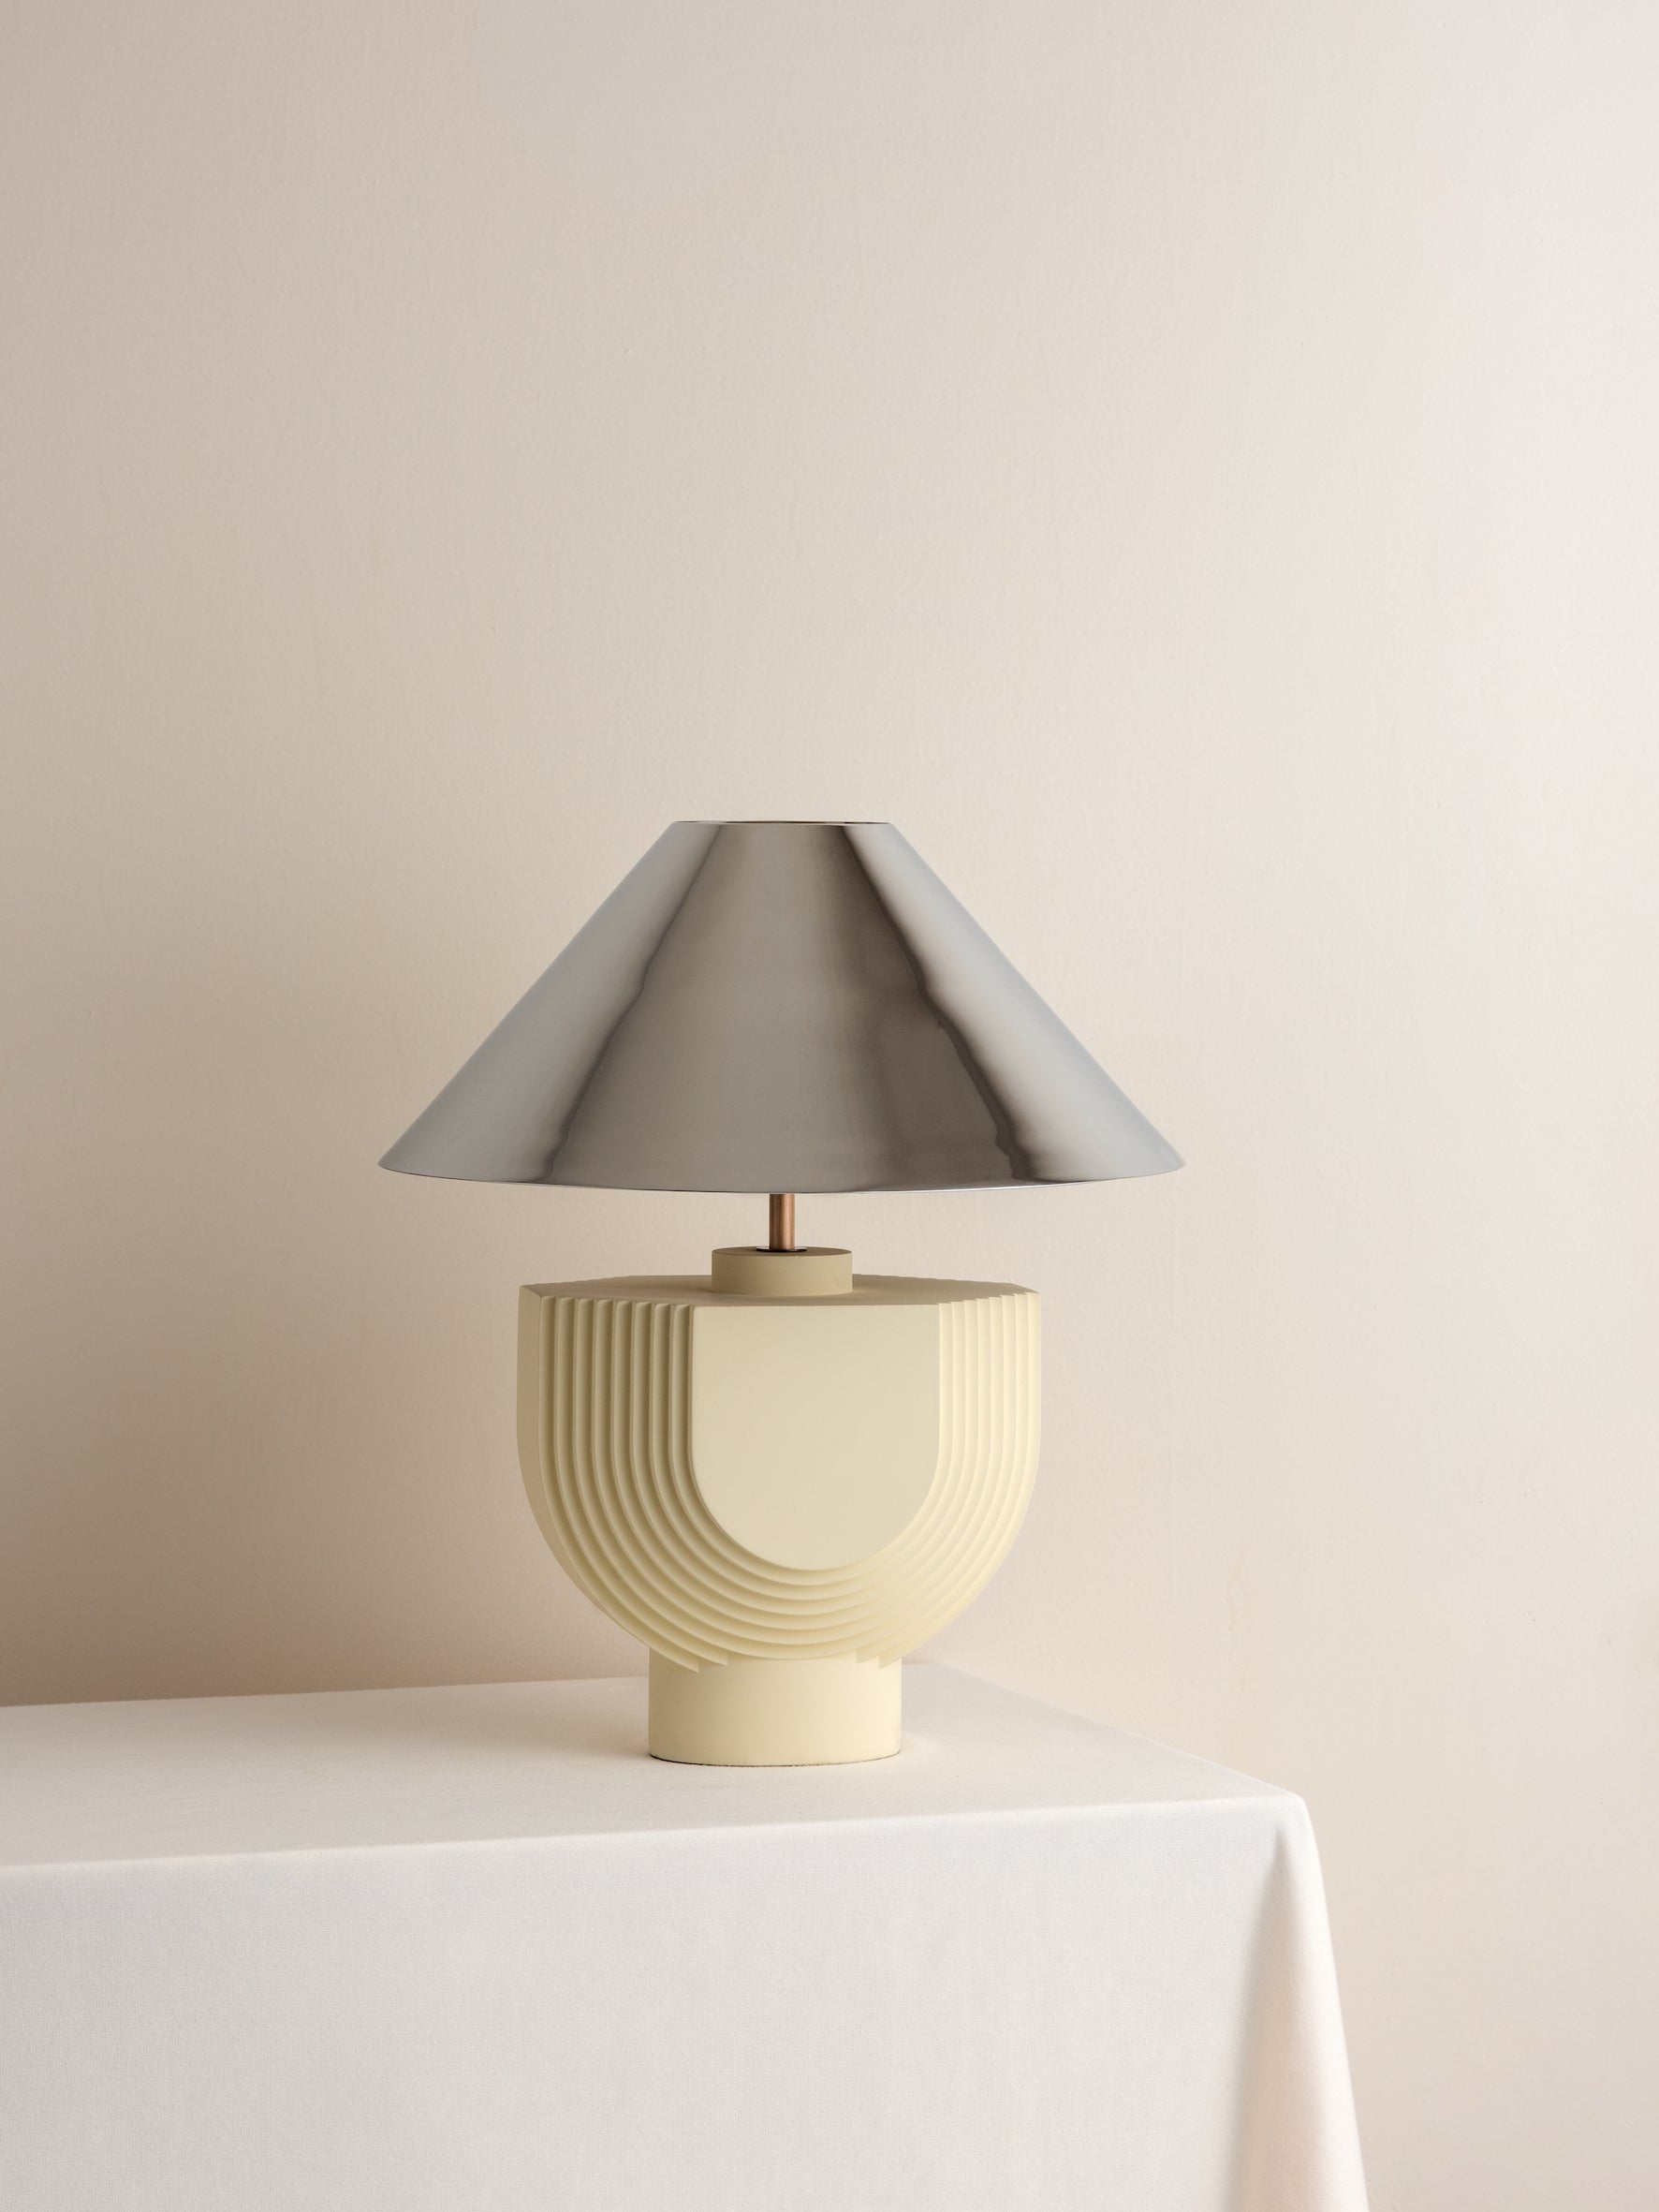 Editions concrete lamp with + chrome shade | Table Lamp | Lights & Lamps Inc | Modern Affordable Designer Lighting | USA